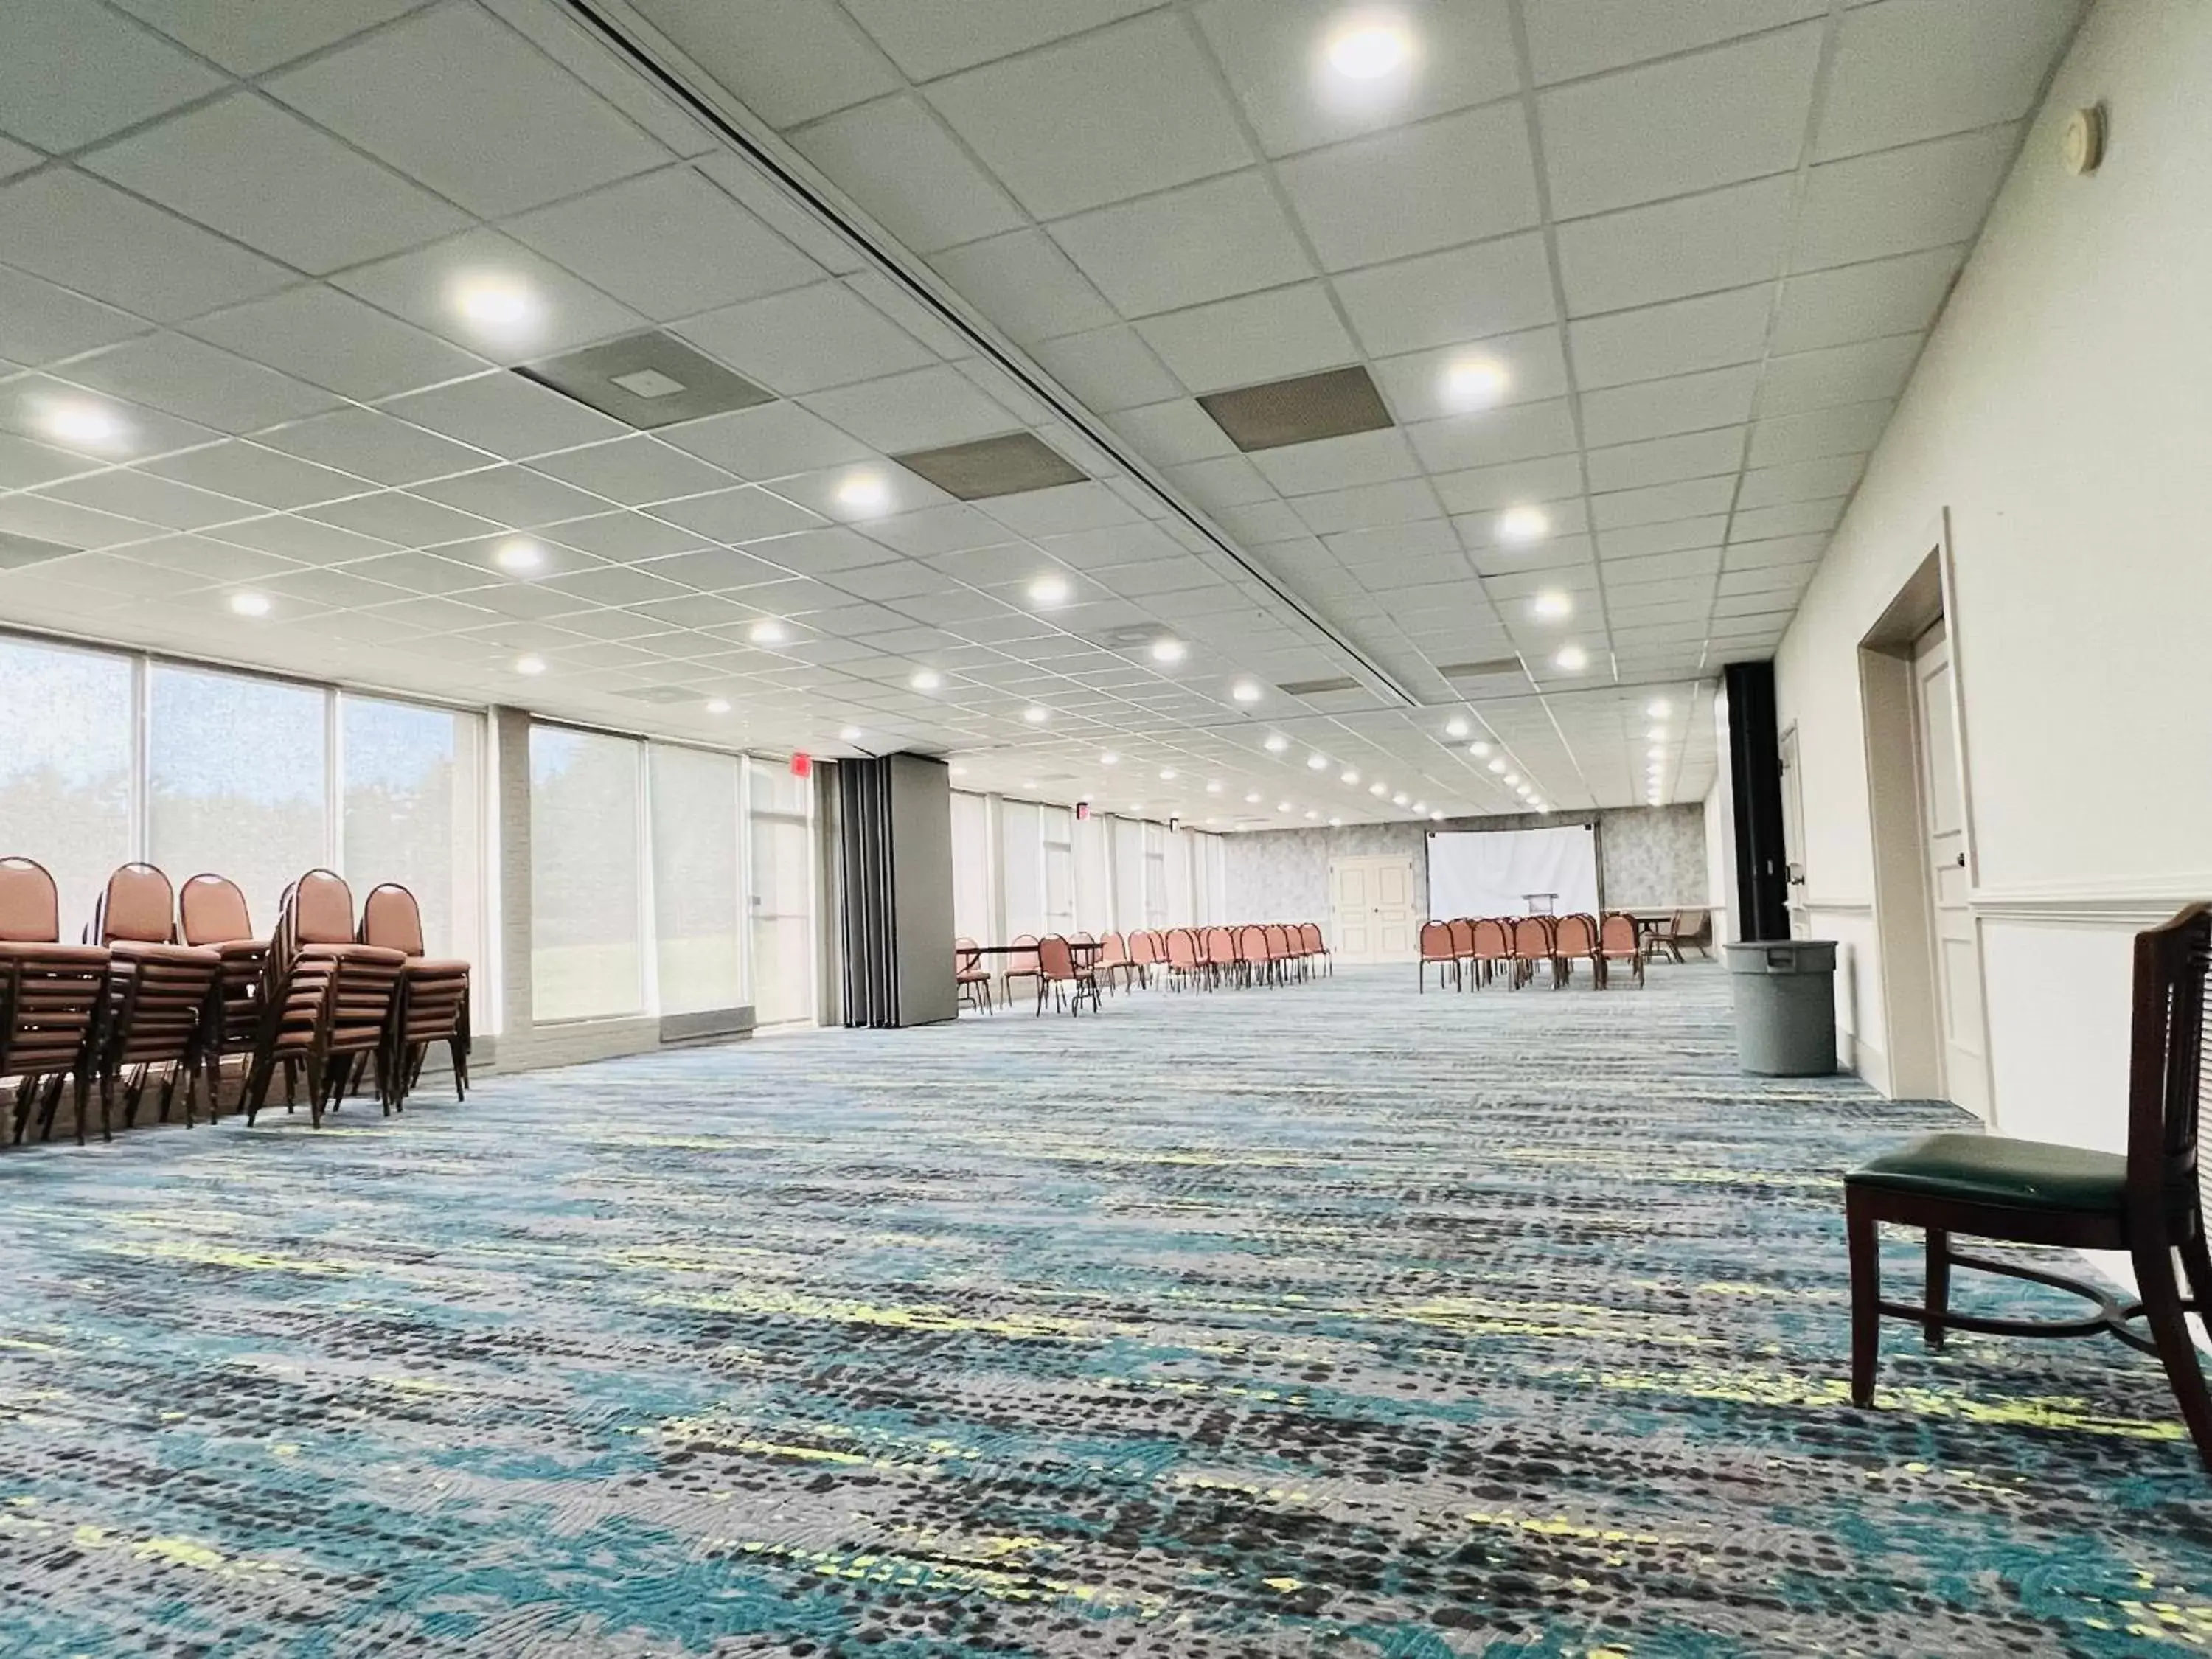 Banquet/Function facilities, Banquet Facilities in Quality Inn & Suites McDonough South I-75